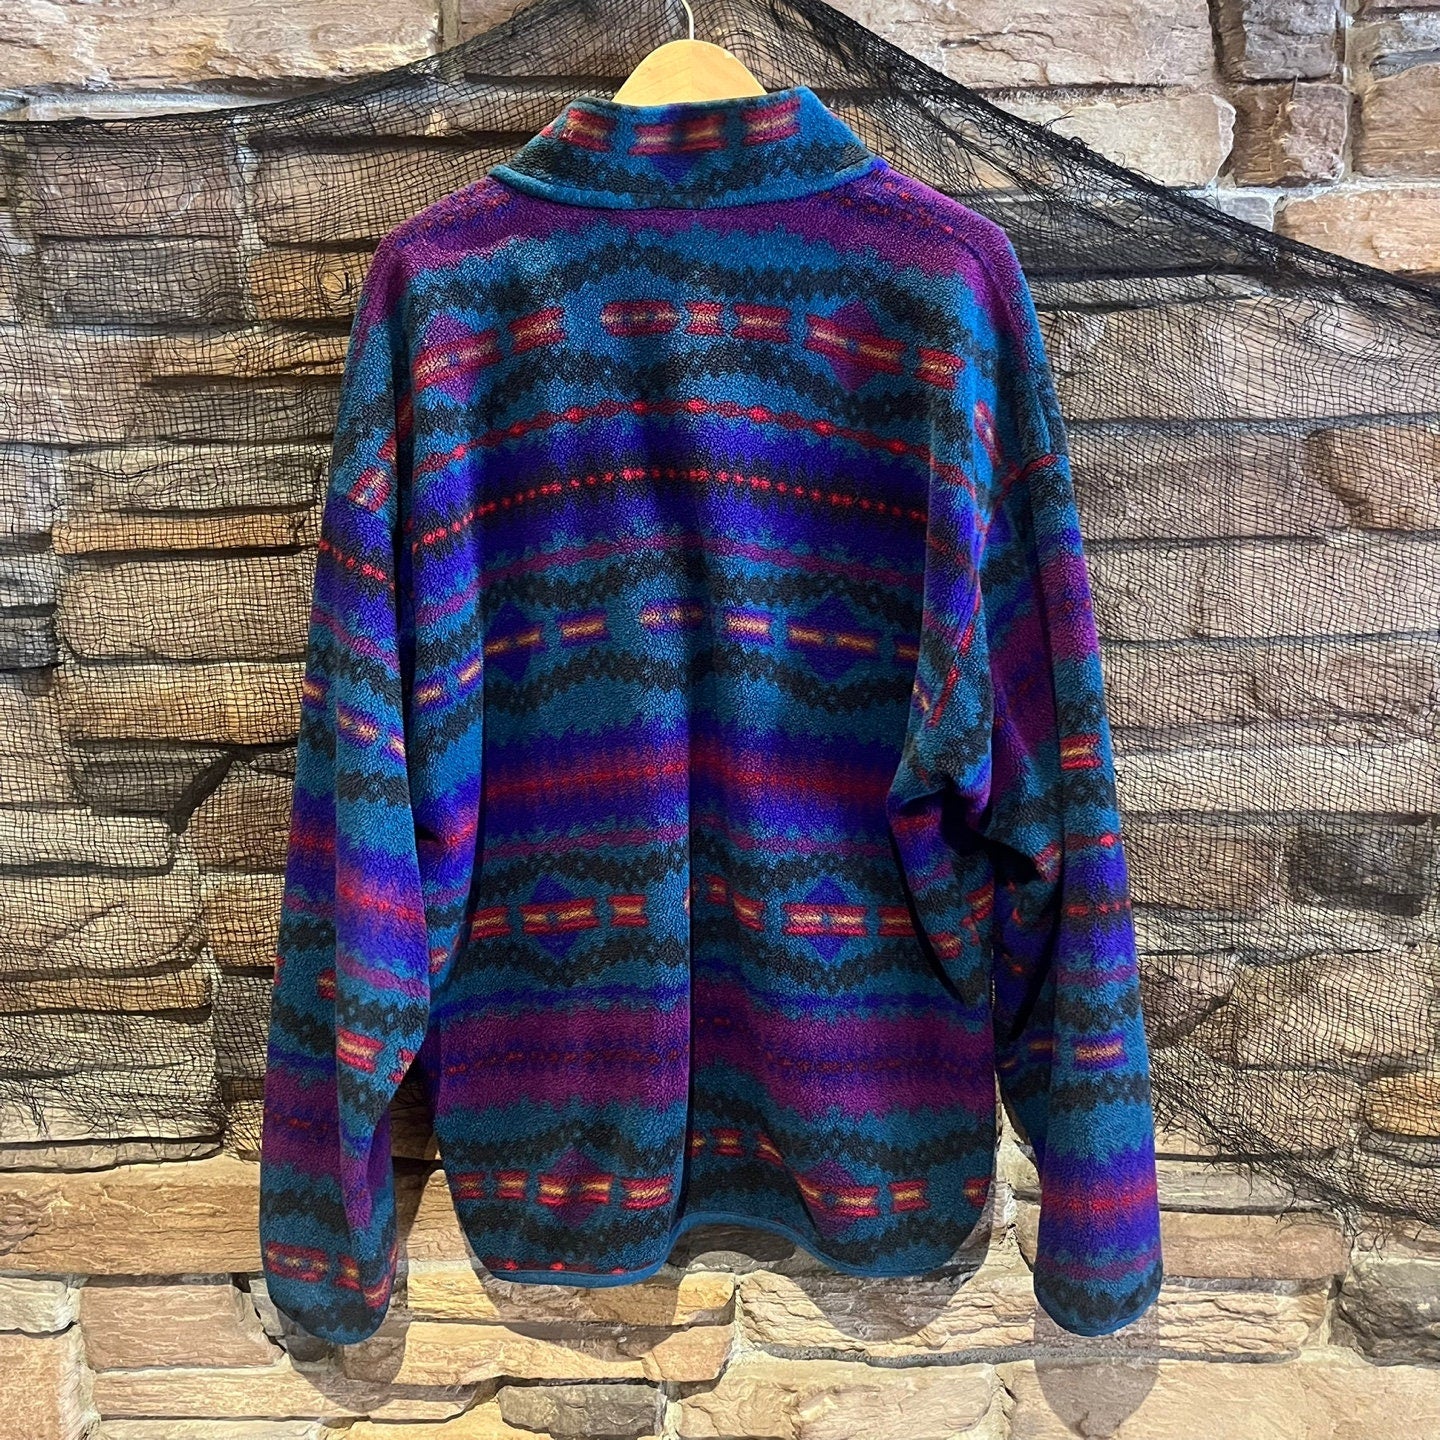 Vintage Patagonia Fleece With Geometric Zig-Zag Pattern and Snap Closure | Vintage Purple Sweater | Made in USA | Size XL | STQ-3342